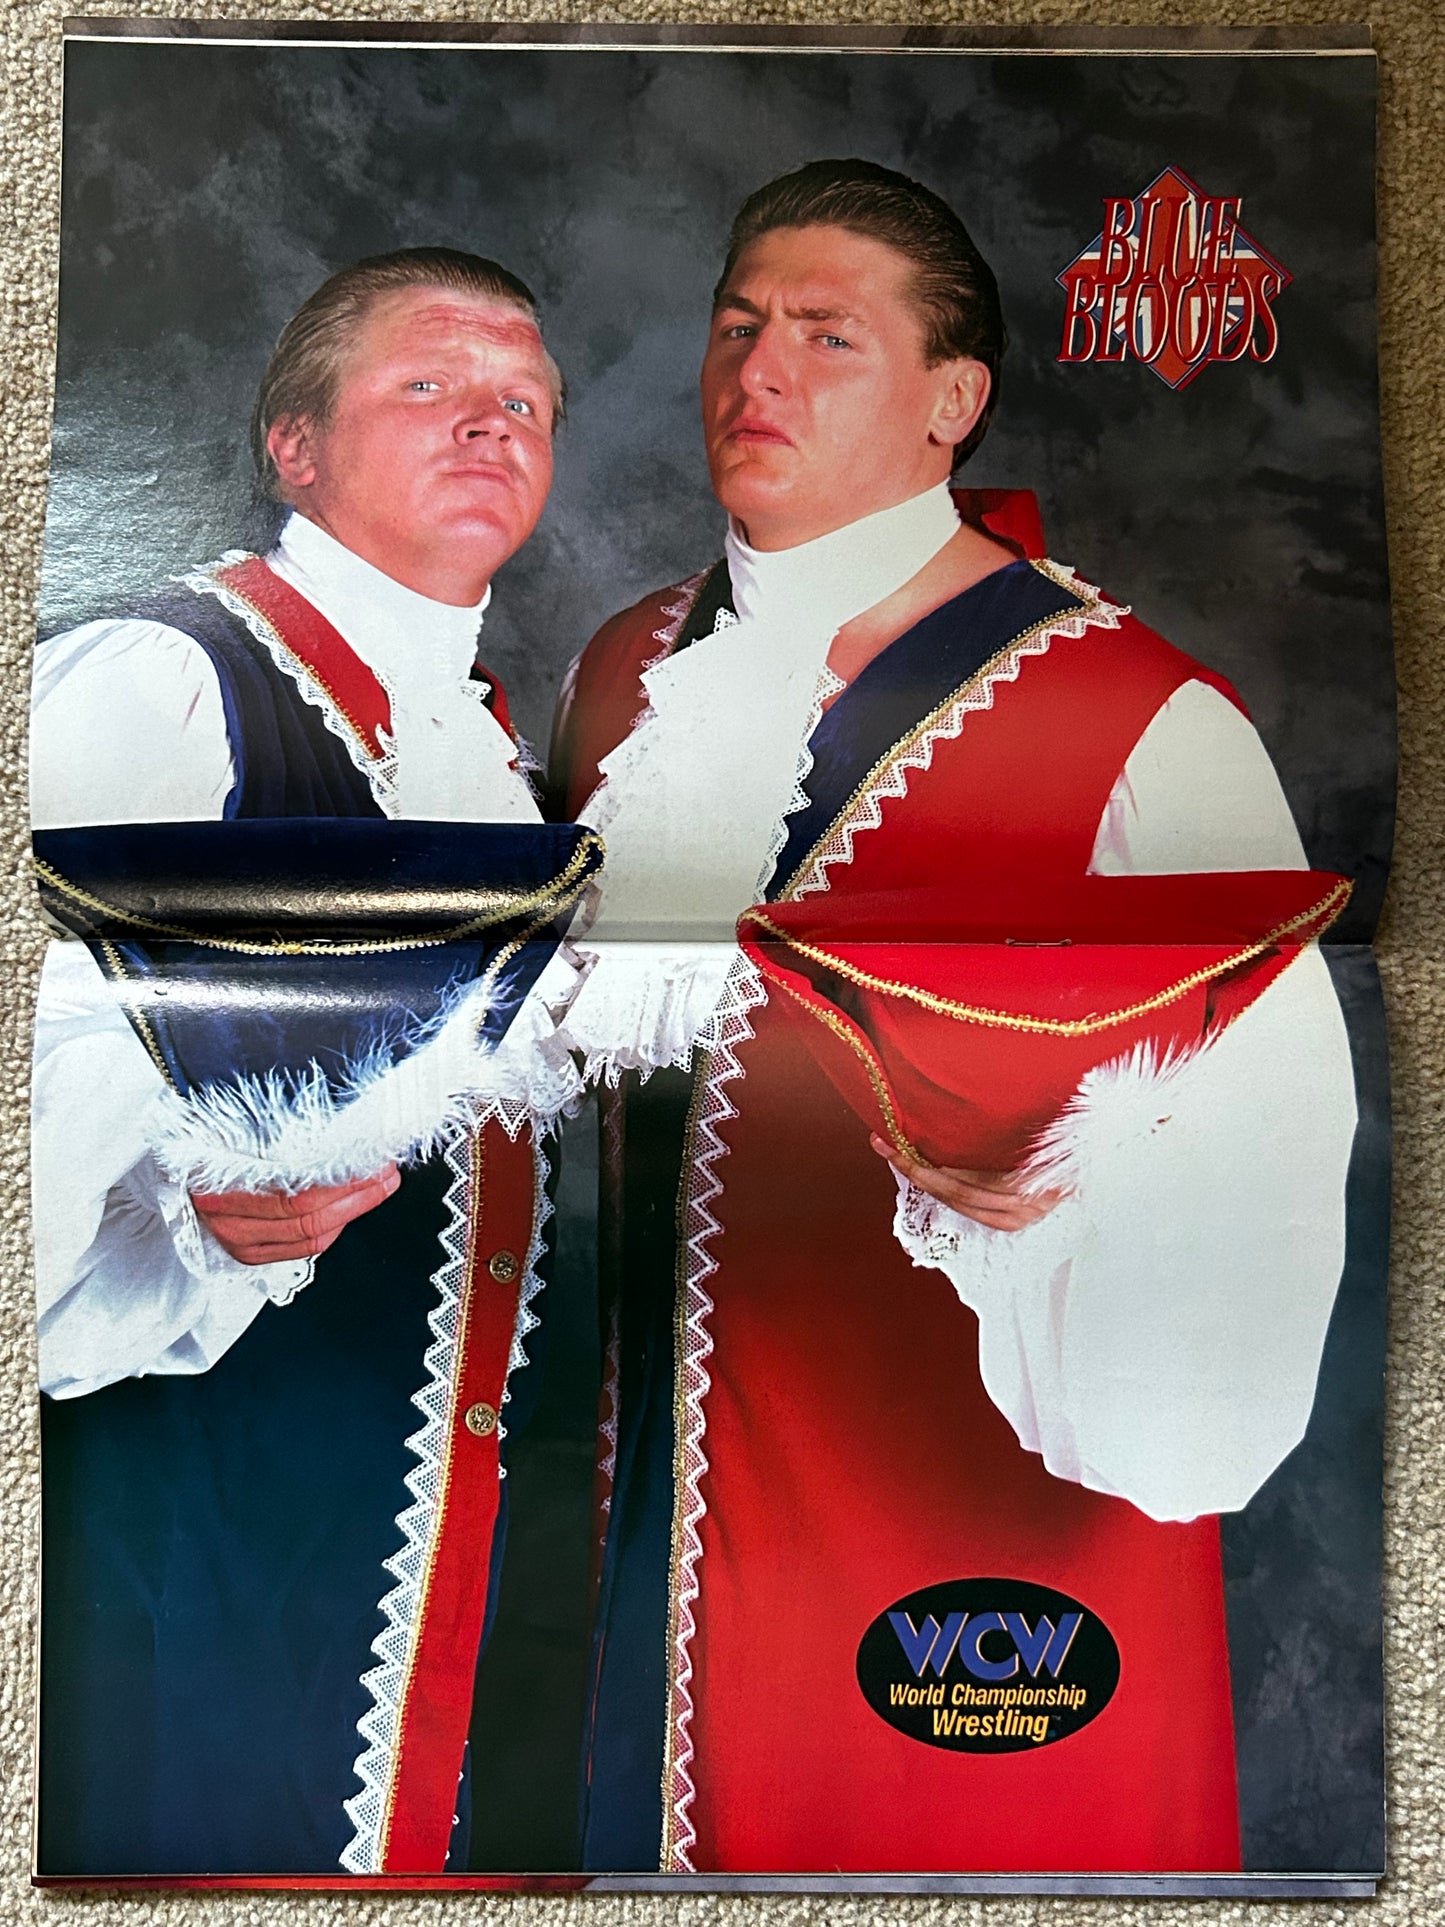 WCW Magazine August 1995 Issue 6